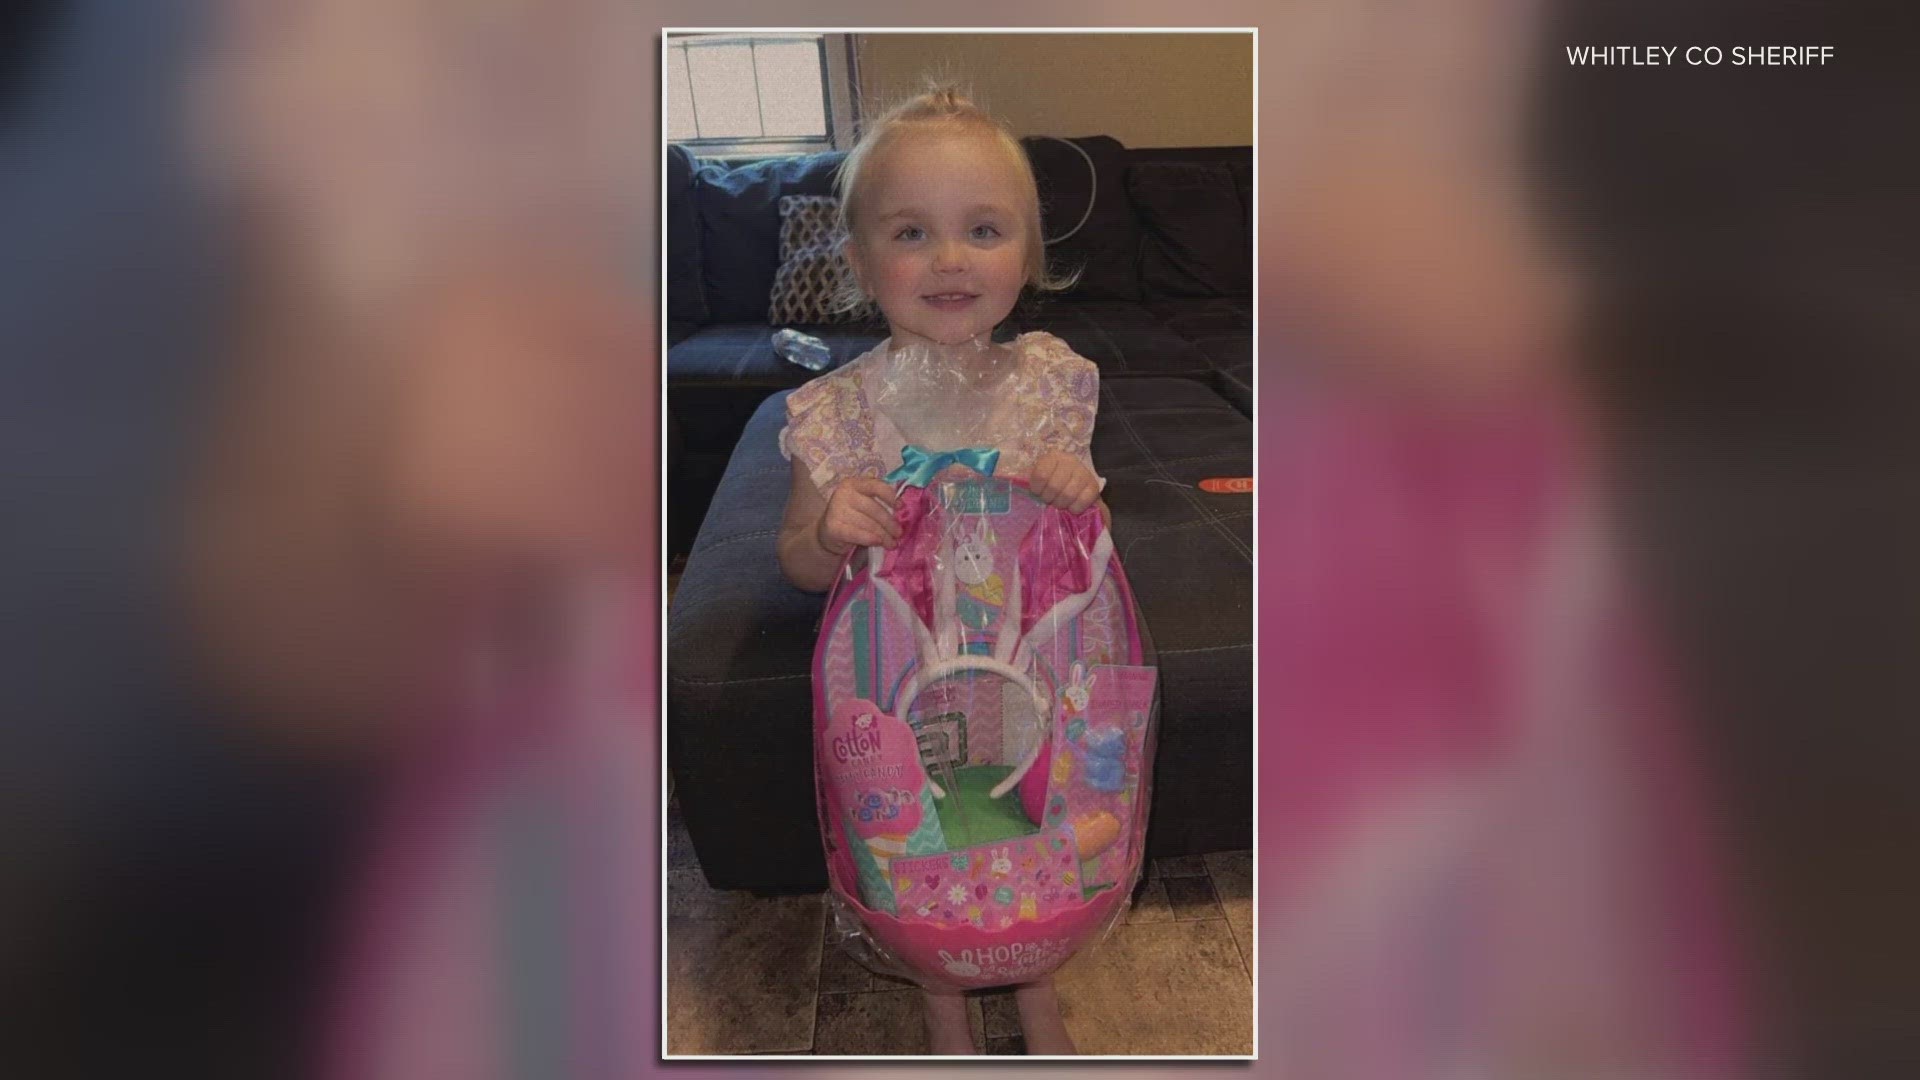 The Whitley County Sheriff confirms a body believed to be 4-year-old Chloe Darnel was recovered Thursday and sent to Frankfort for an autopsy.